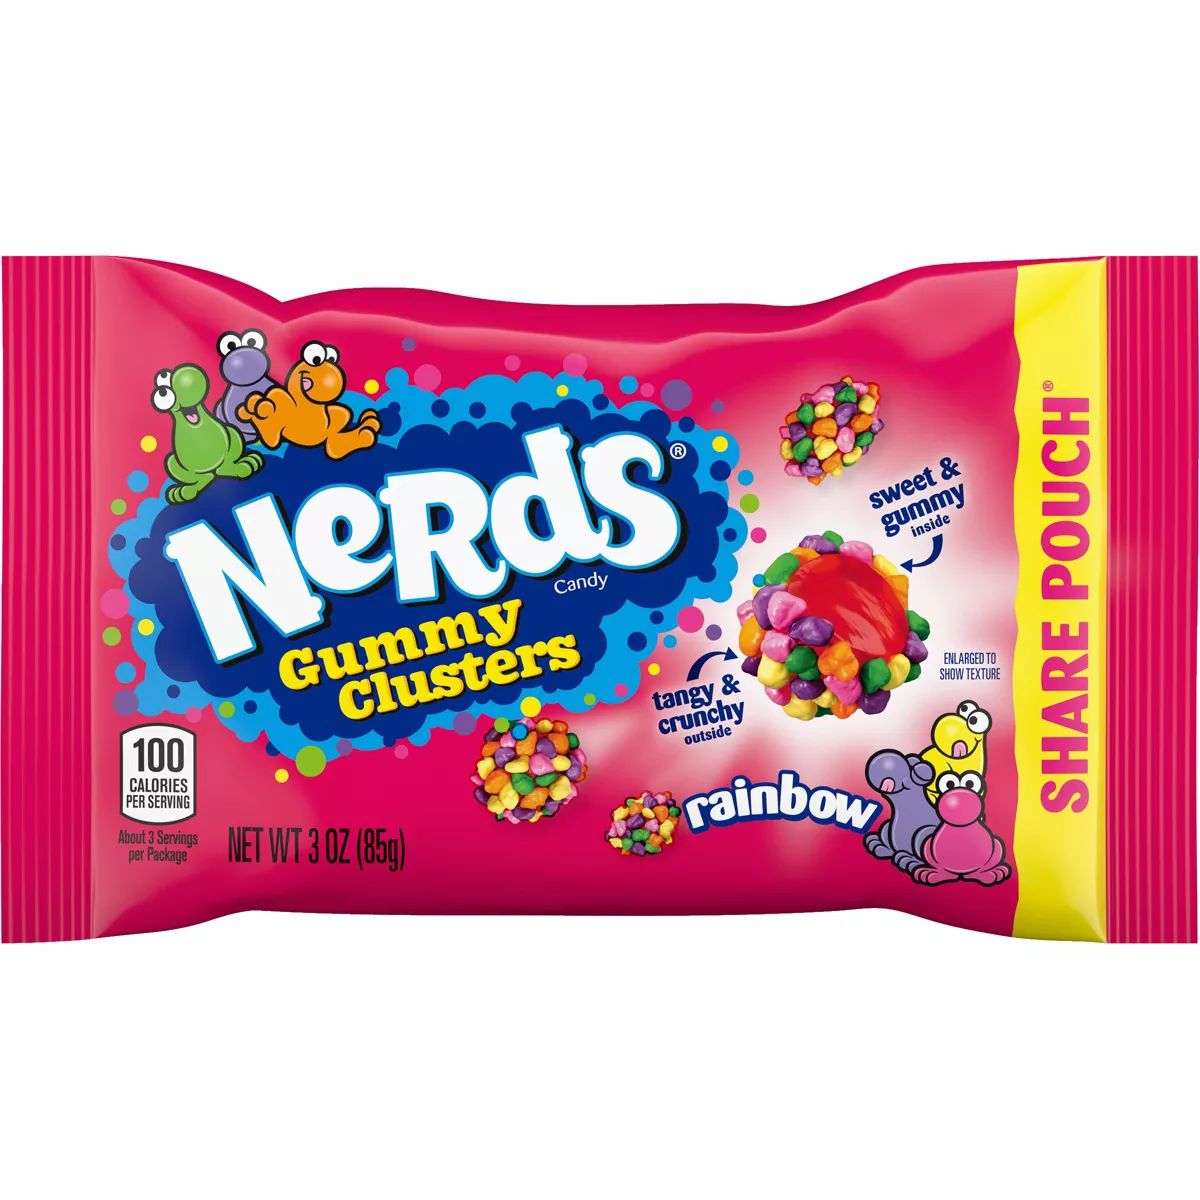 Nerds Gummy Clusters Candy - 3oz | Target